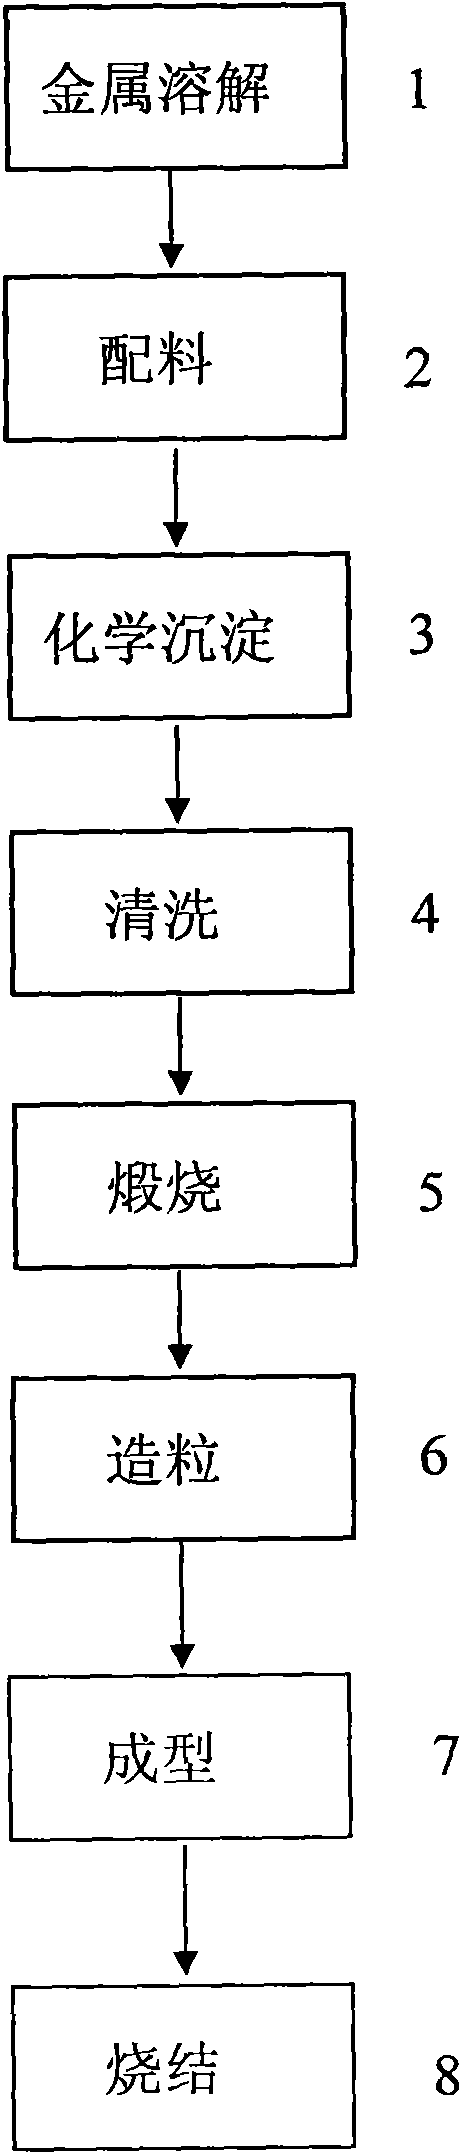 Nb-doped nano indium tin oxide powder and method for preparing high density sputtering coating target thereof